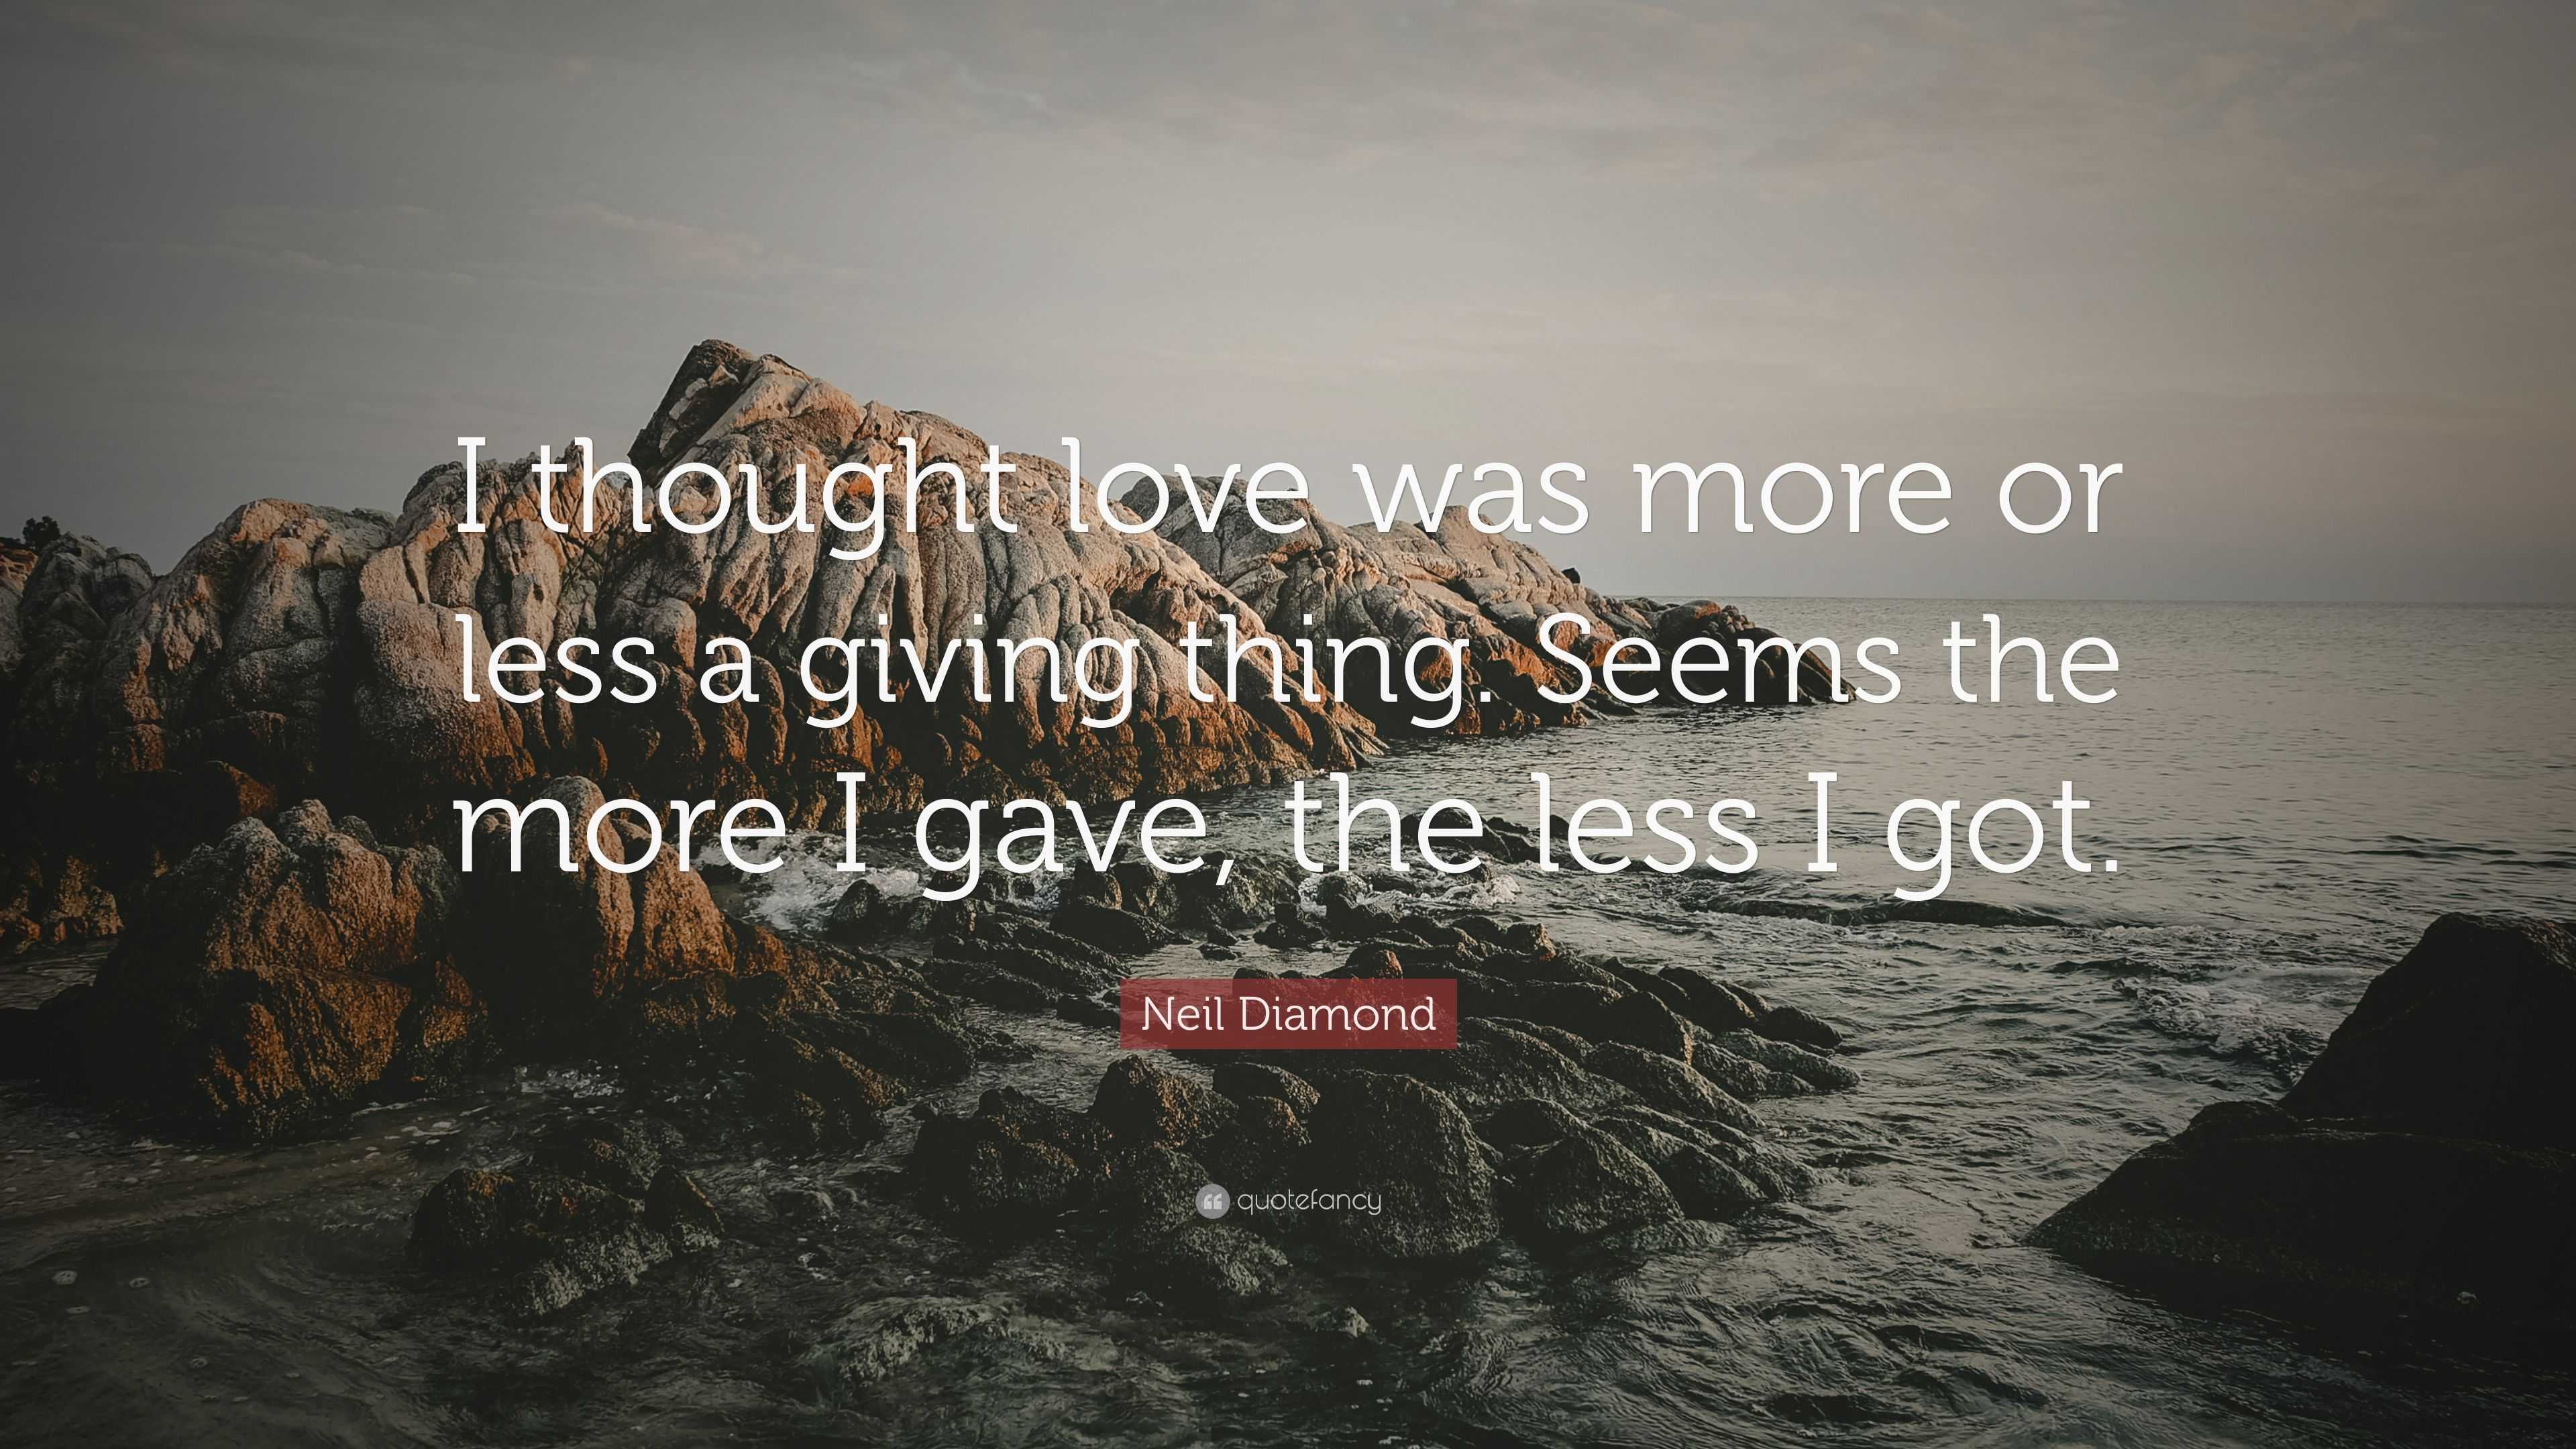 Neil Diamond Quote “i Thought Love Was More Or Less A Giving Thing